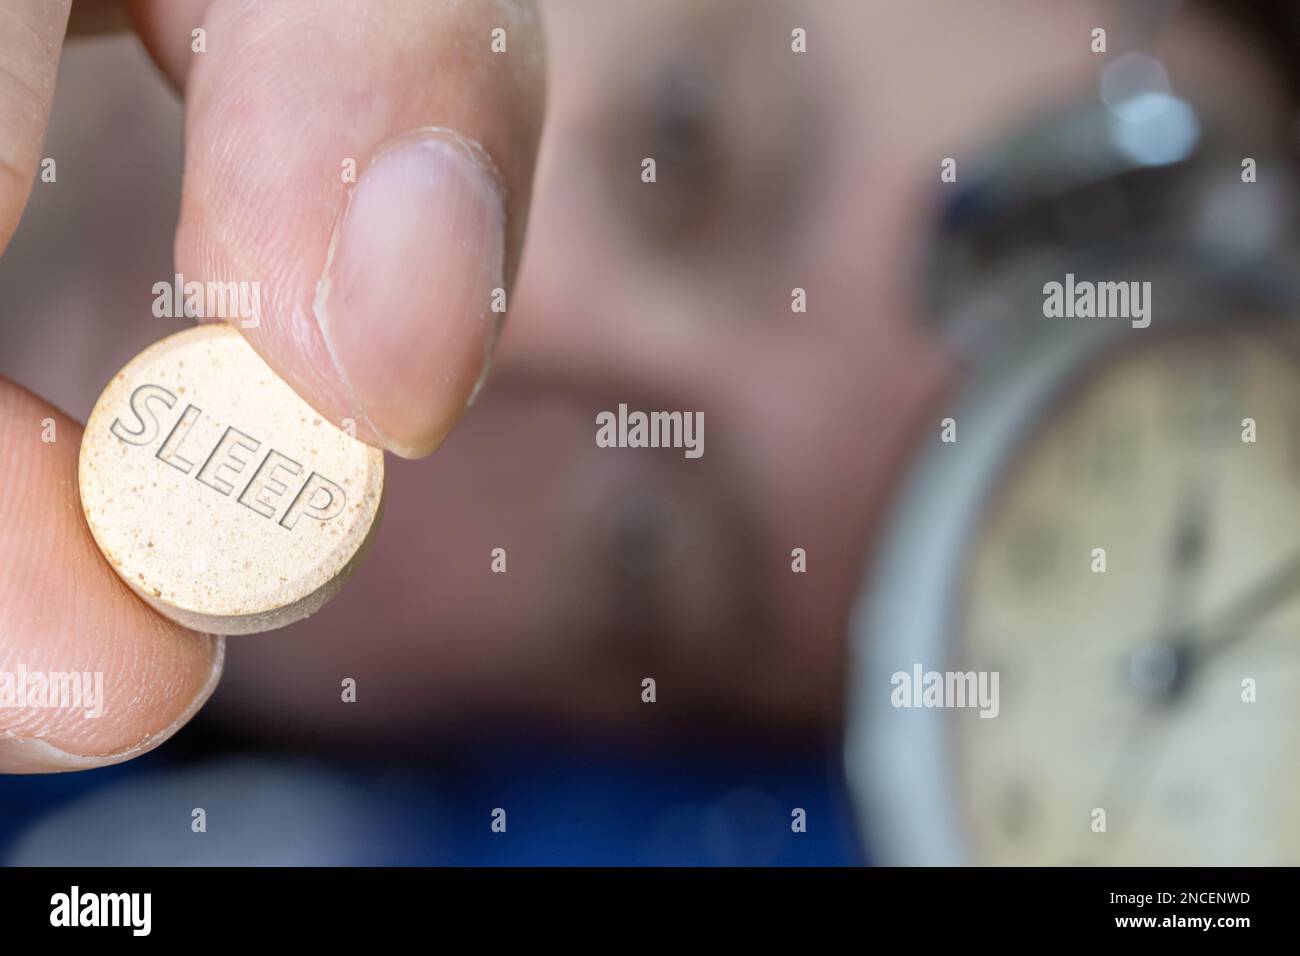 Man lying in bed taking sleeping pill after midnight, close up Stock Photo